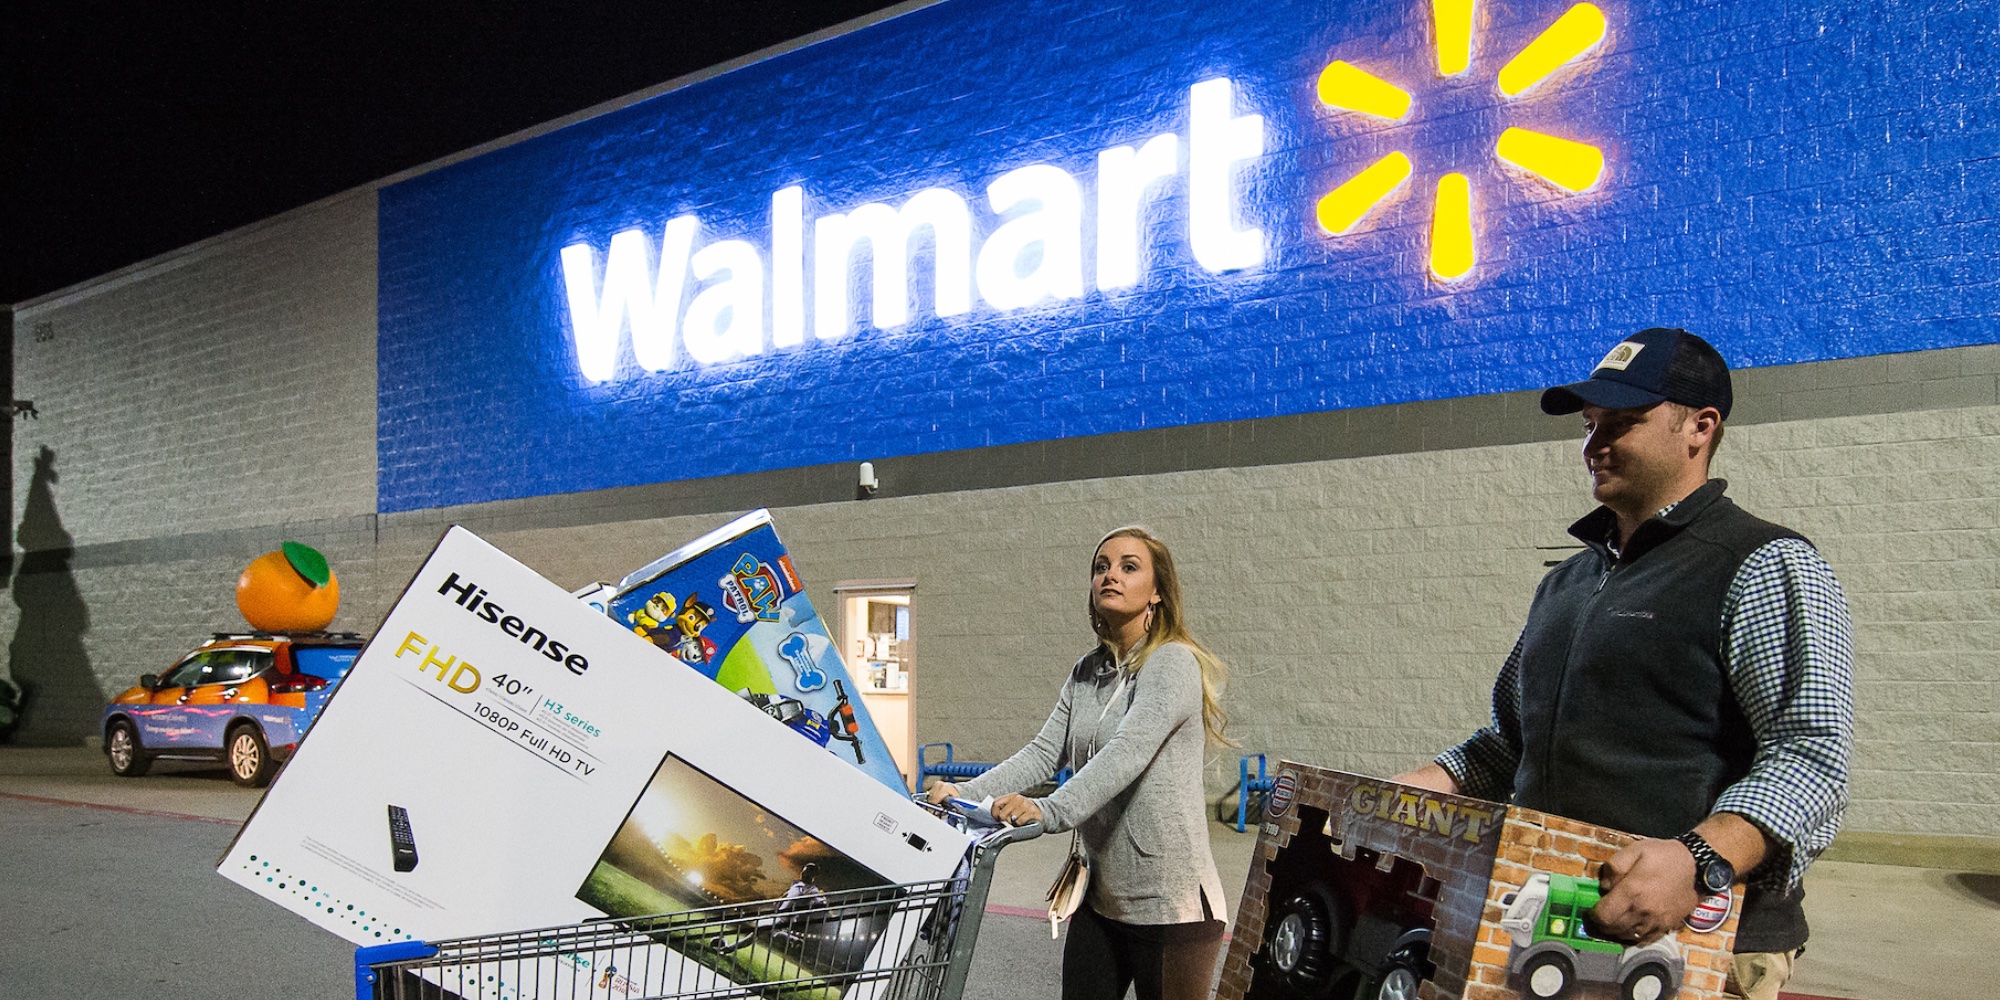 Walmart Black Friday 2019 preparation guide - 9to5Toys